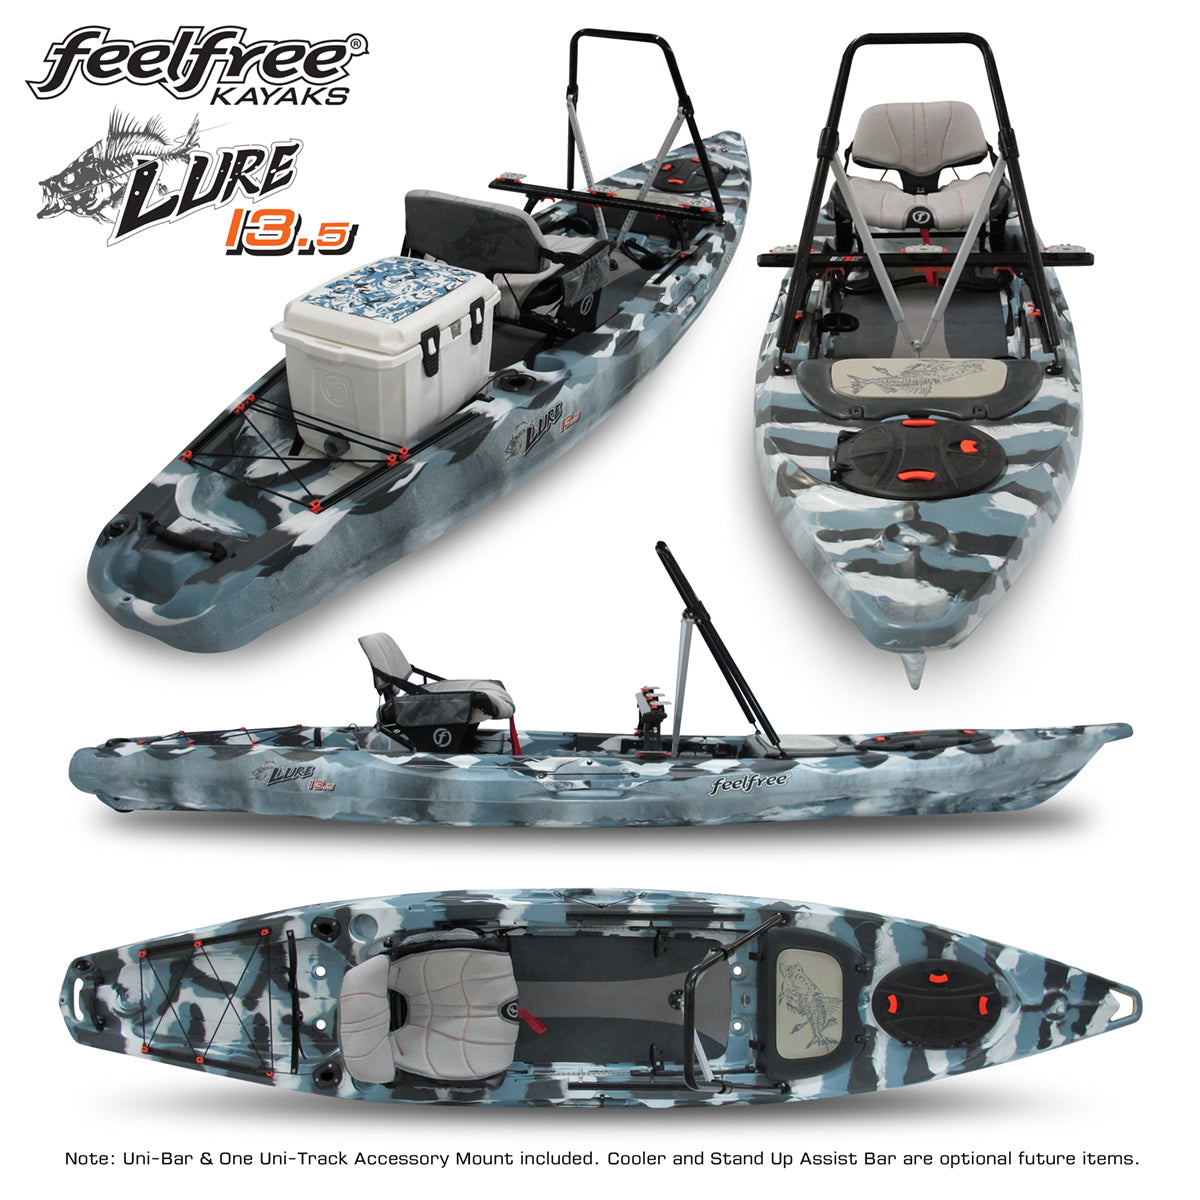 Press Release - Feelfree Continues to Expand with New Fishing